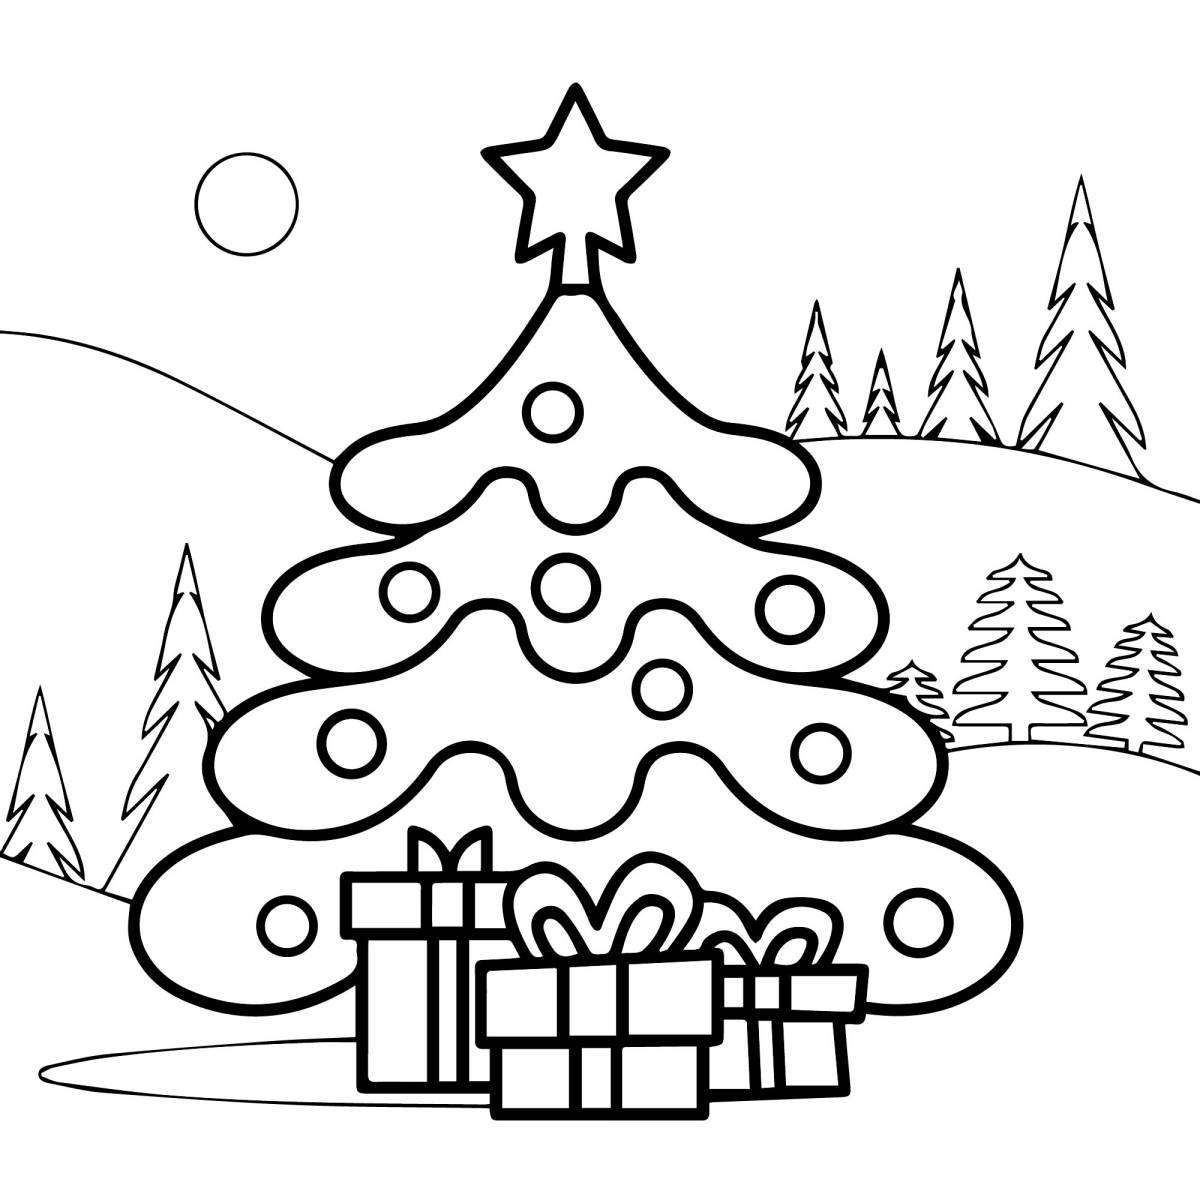 Coloring book gorgeous Christmas tree